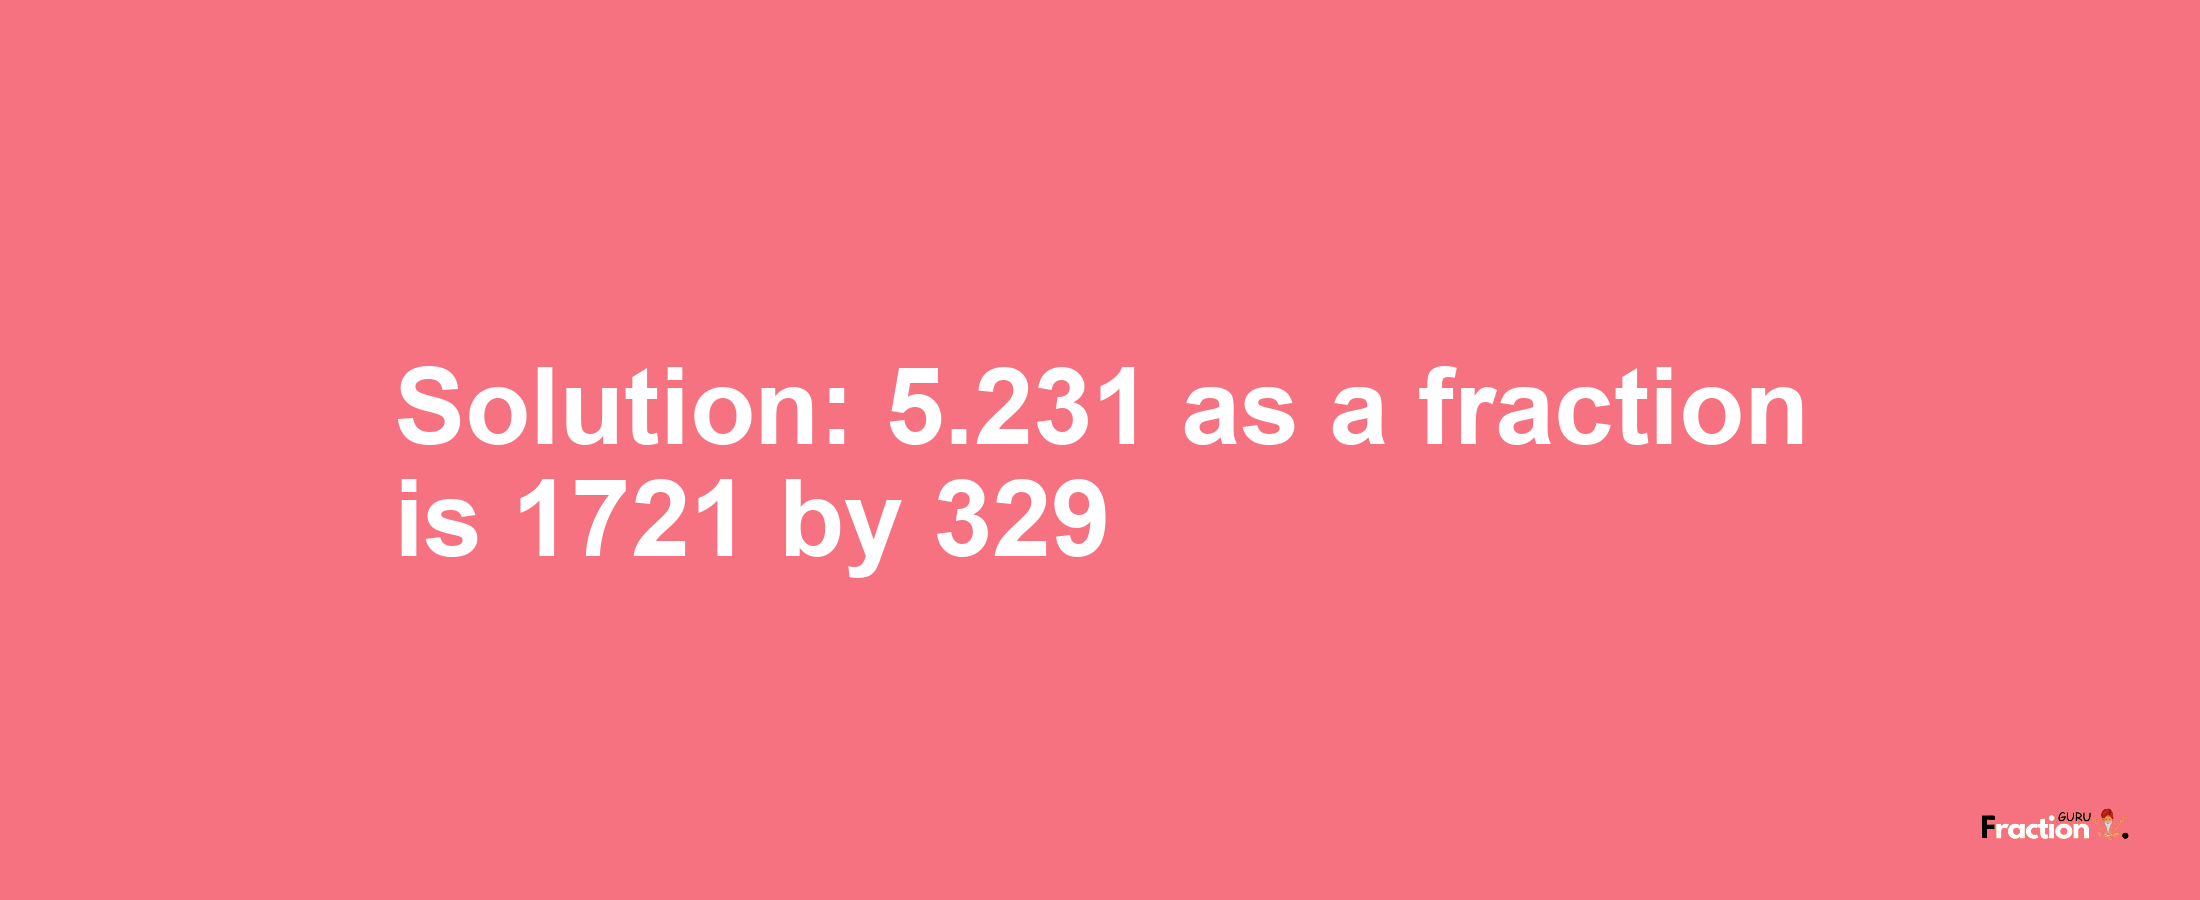 Solution:5.231 as a fraction is 1721/329